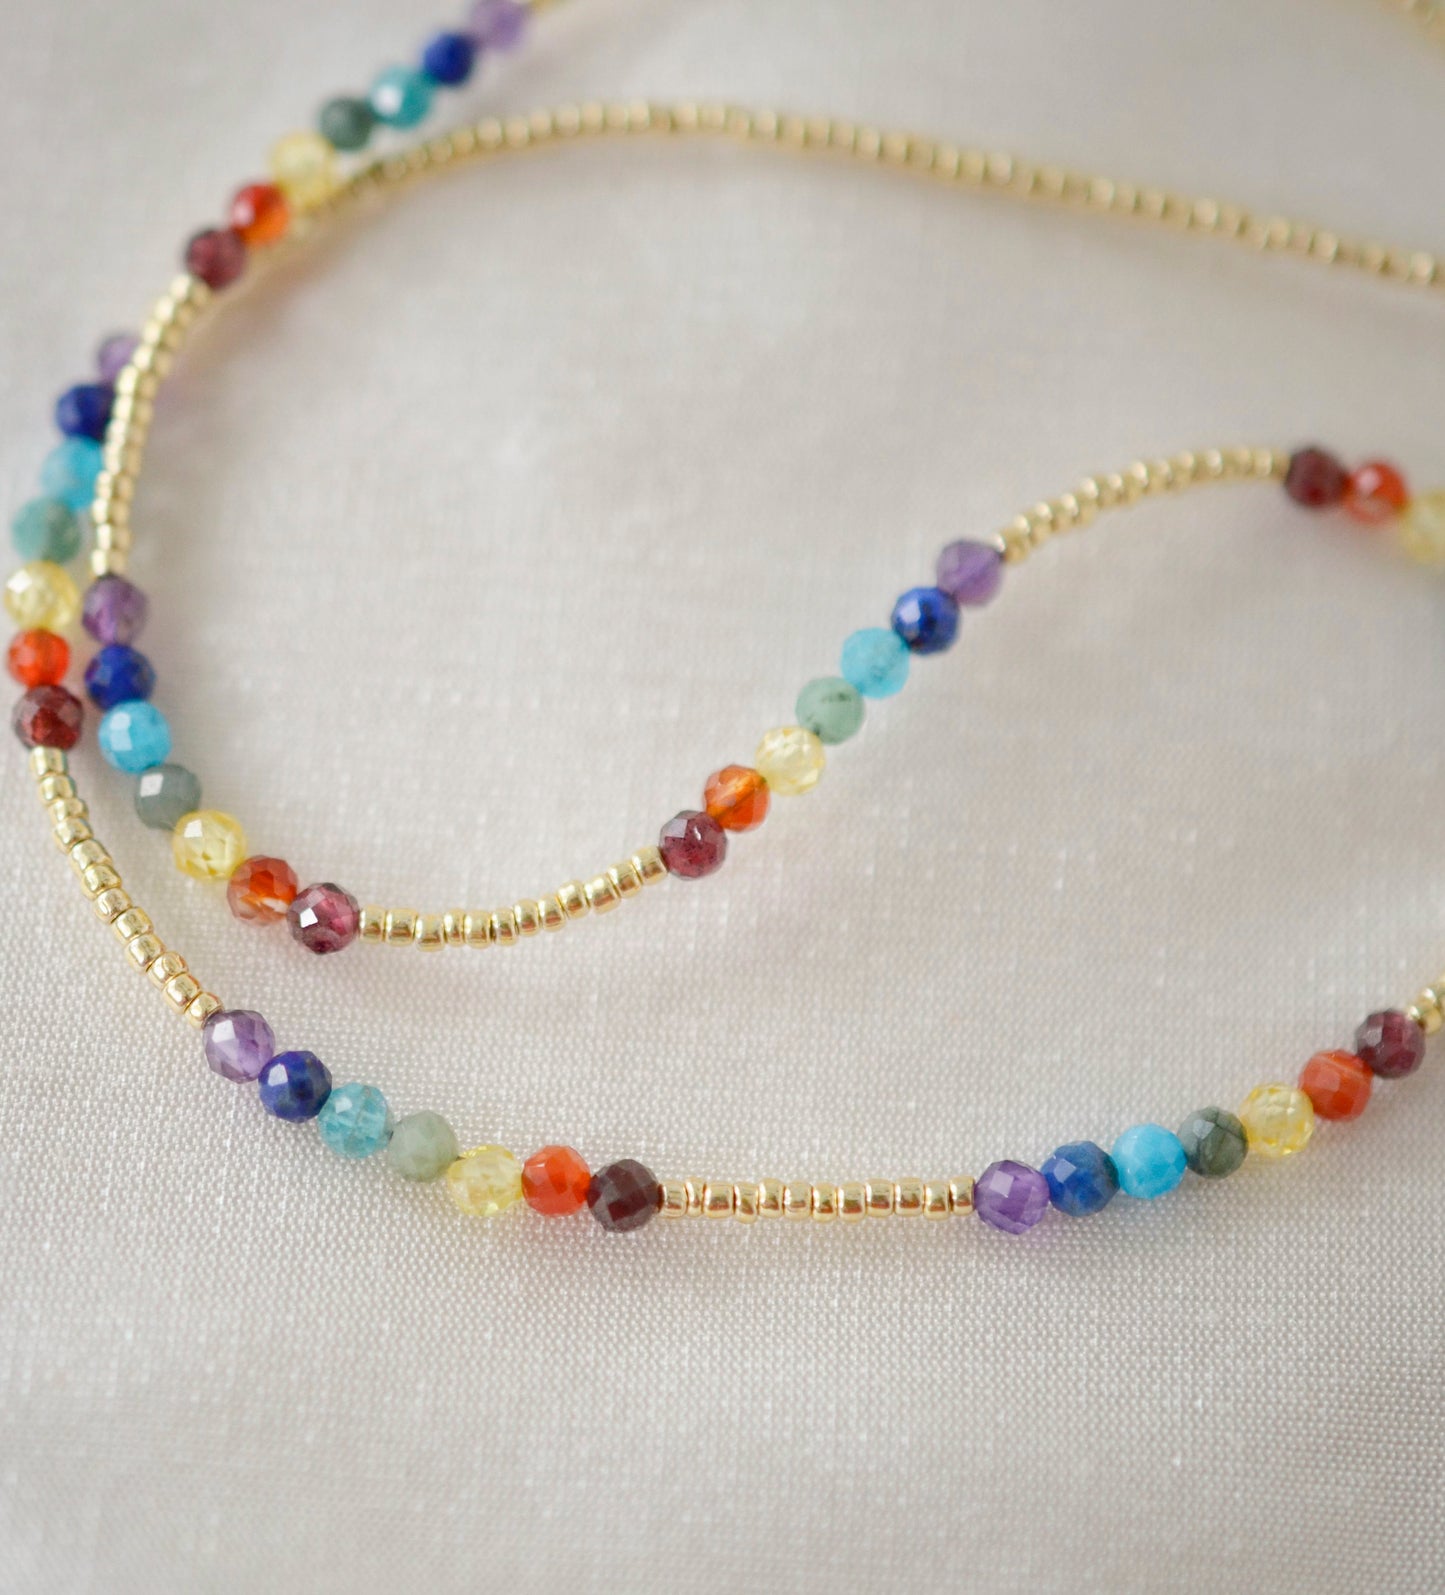 Tiny stones arranged in the order of the seven chakras or rainbow colors. Colors include: purple, blue, aqua, green, yellow, orange, and red. Close up of the gold style.